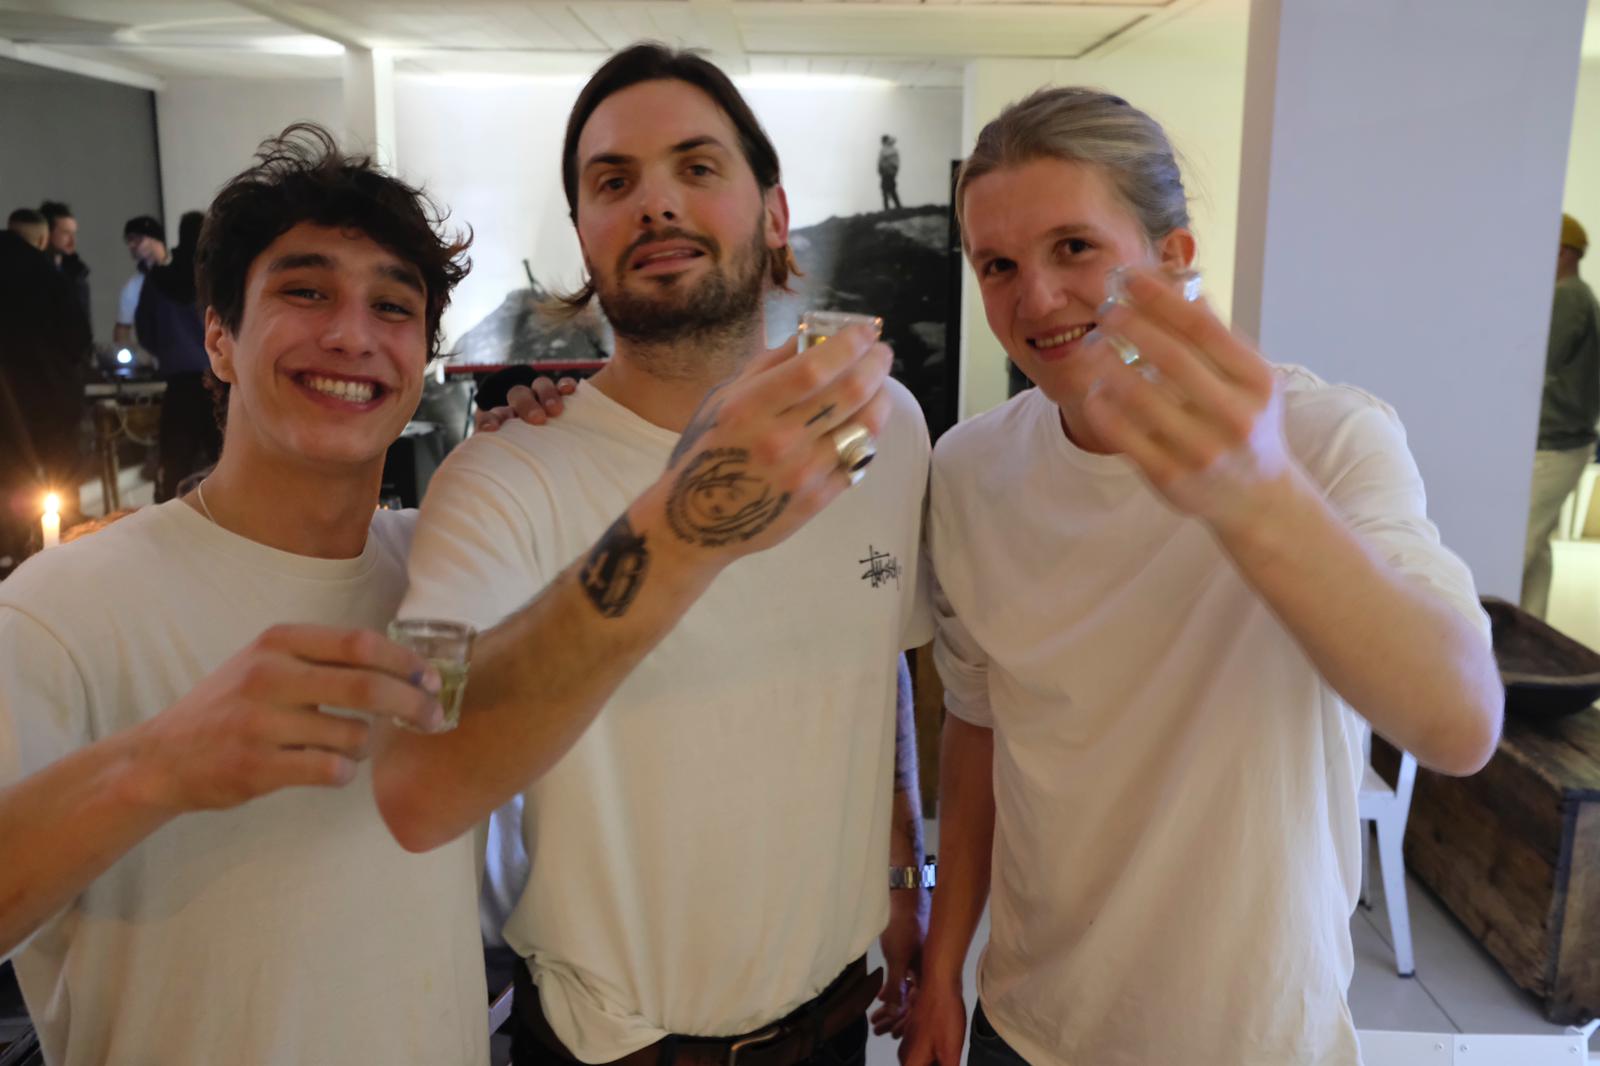 Music act Sons' front man Rory in a Vans team rider sandwich with Sparrow Knox & - Boardsport SOURCE